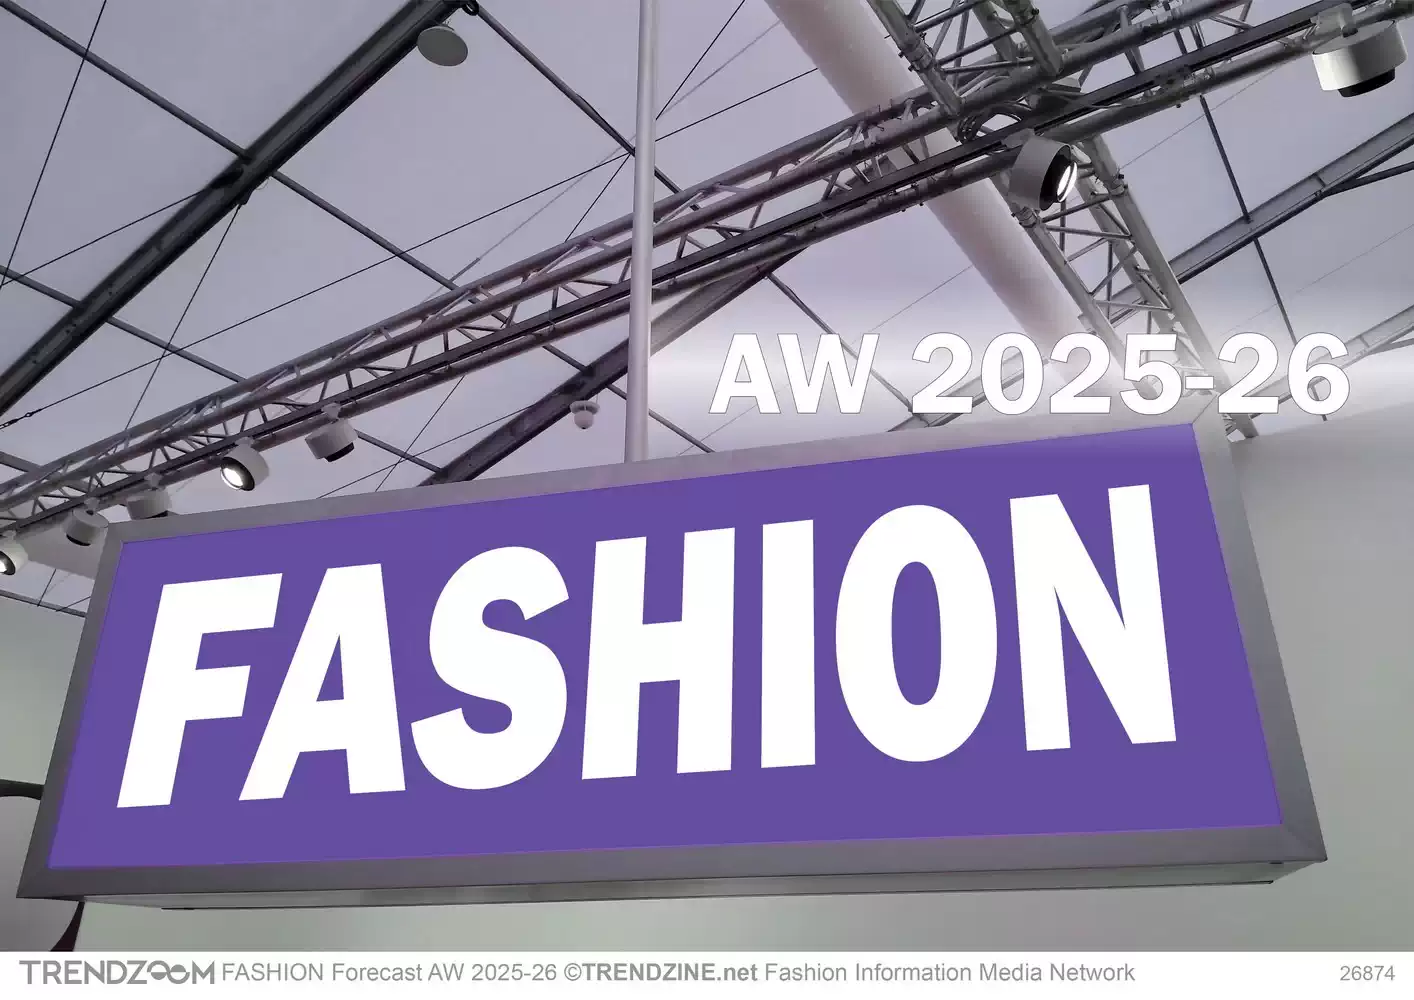 TRENDZOOM Fashion Forecast AW 2025-26 Women Men Youth Apparel Accessories